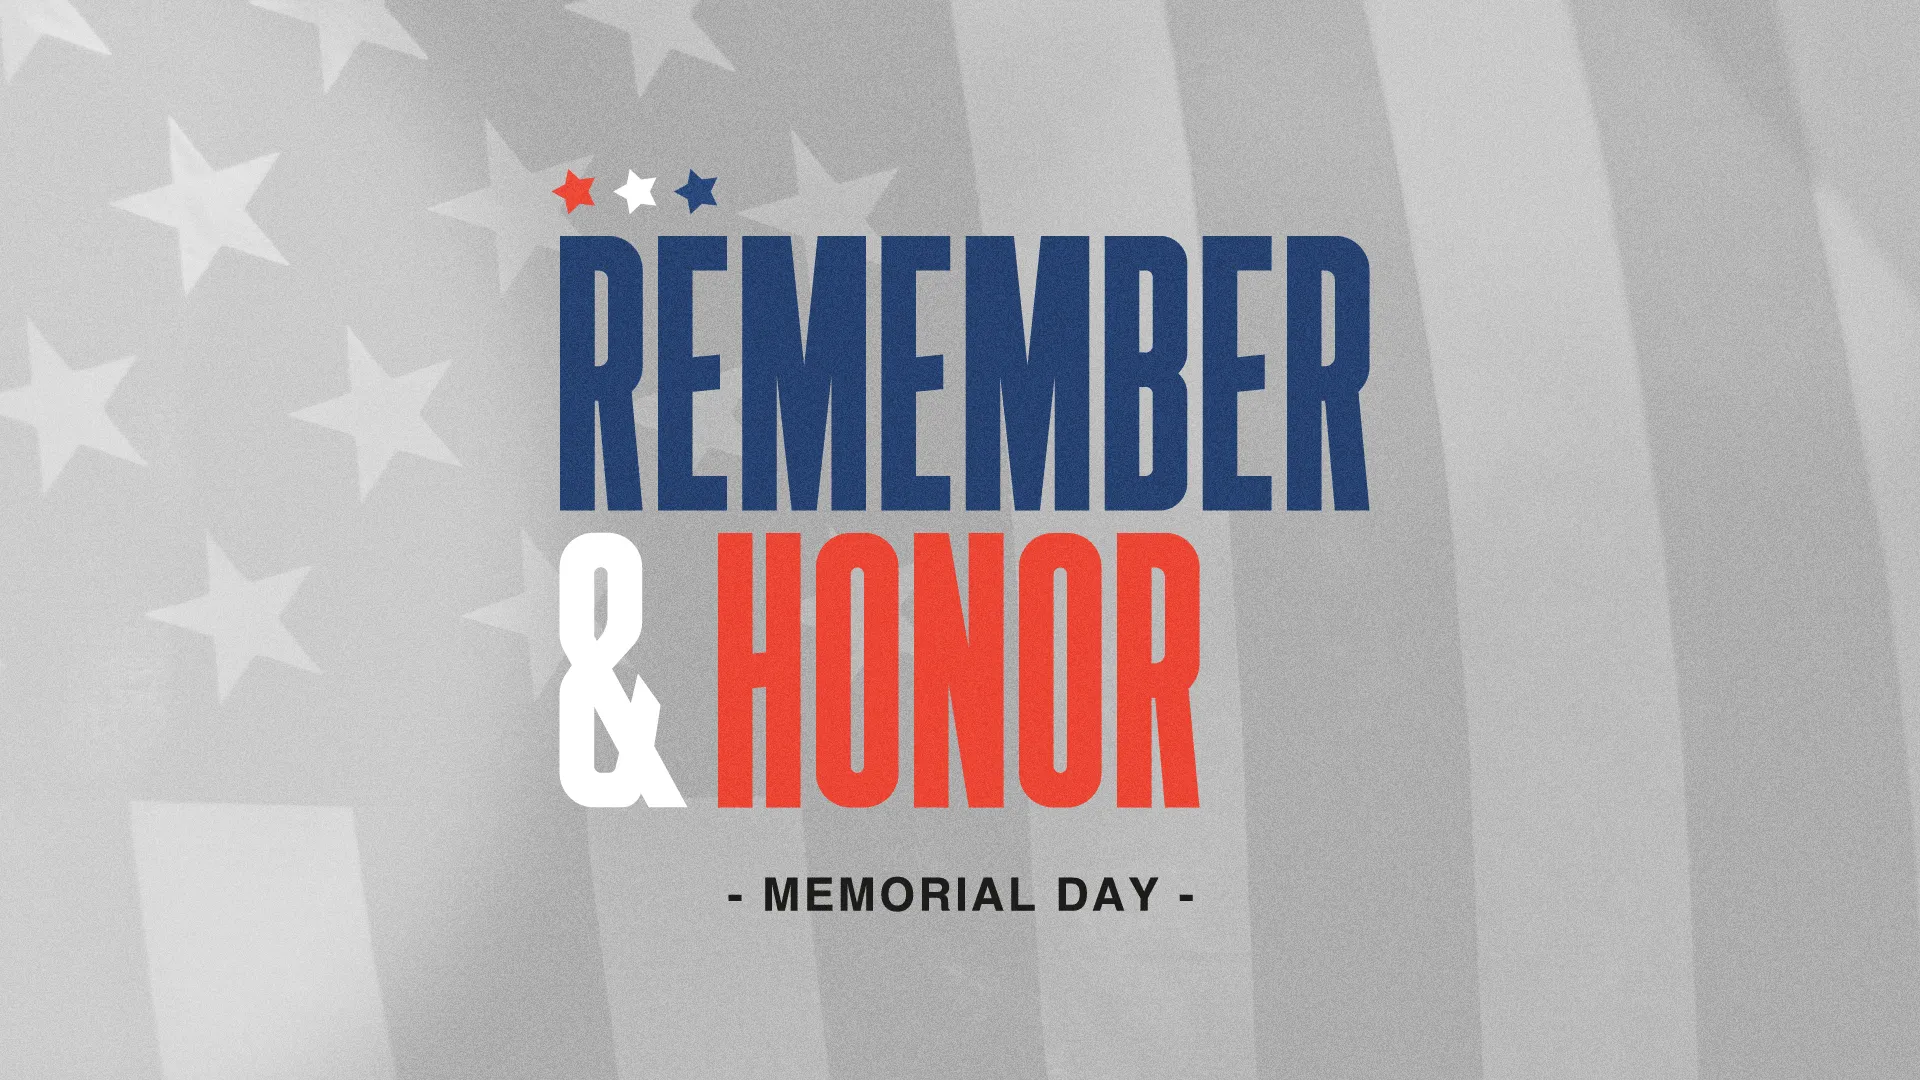 Bring A Sense Of Reverence And Patriotism To Your Memorial Day Services With This Graphic, Which Emphasizes The Duty To &Quot;Remember &Amp; Honor&Quot; Those Who Have Served, Perfect For Your Church'S Commemorative Events.